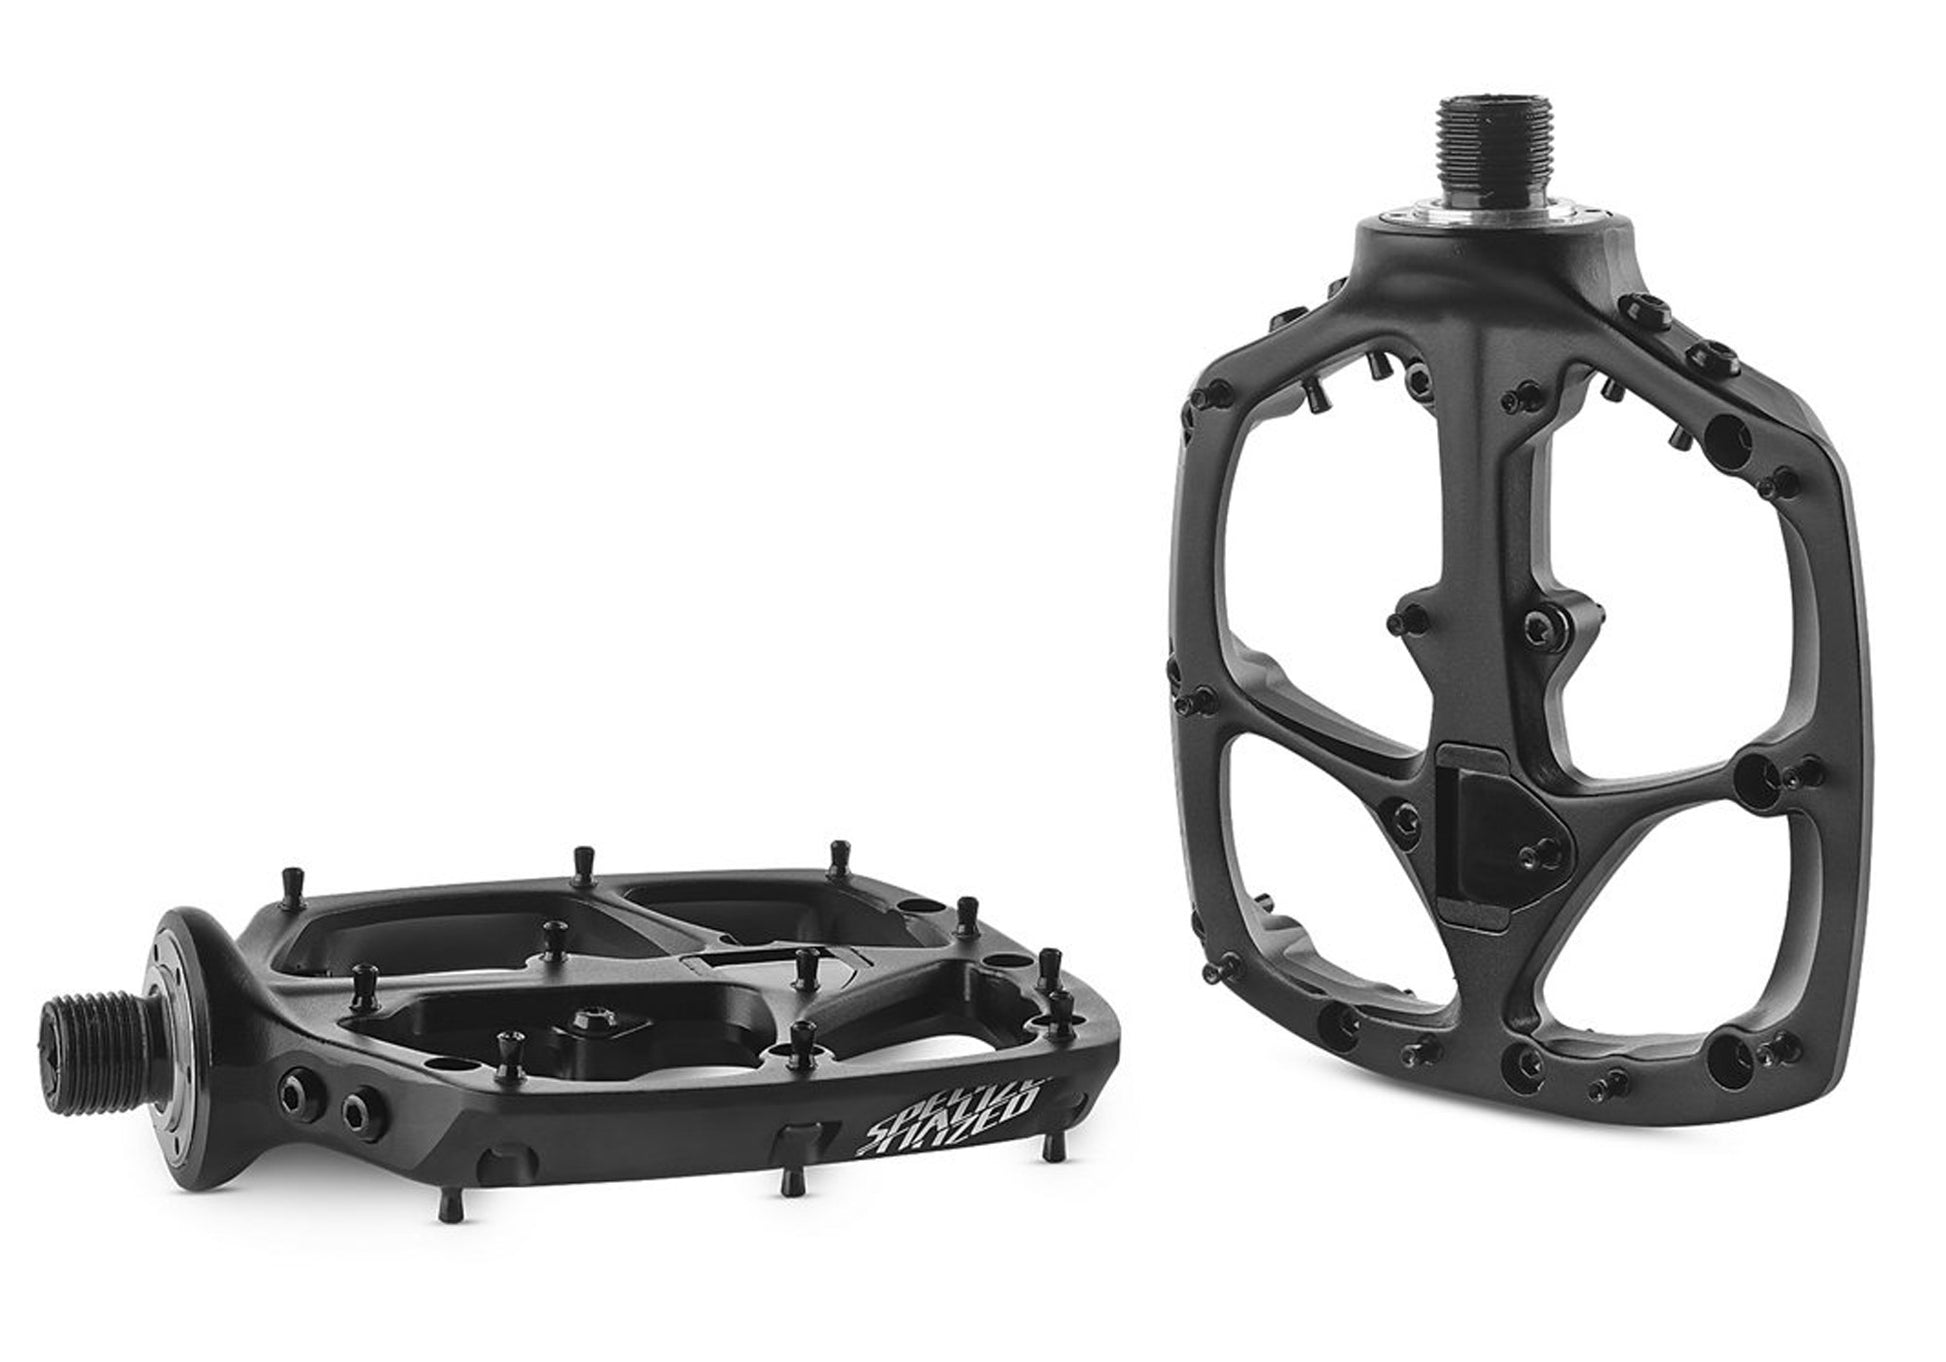 Specialized Boomsland Downhill Platform Pedals, Black, buy at Woolys Wheels with free delivery